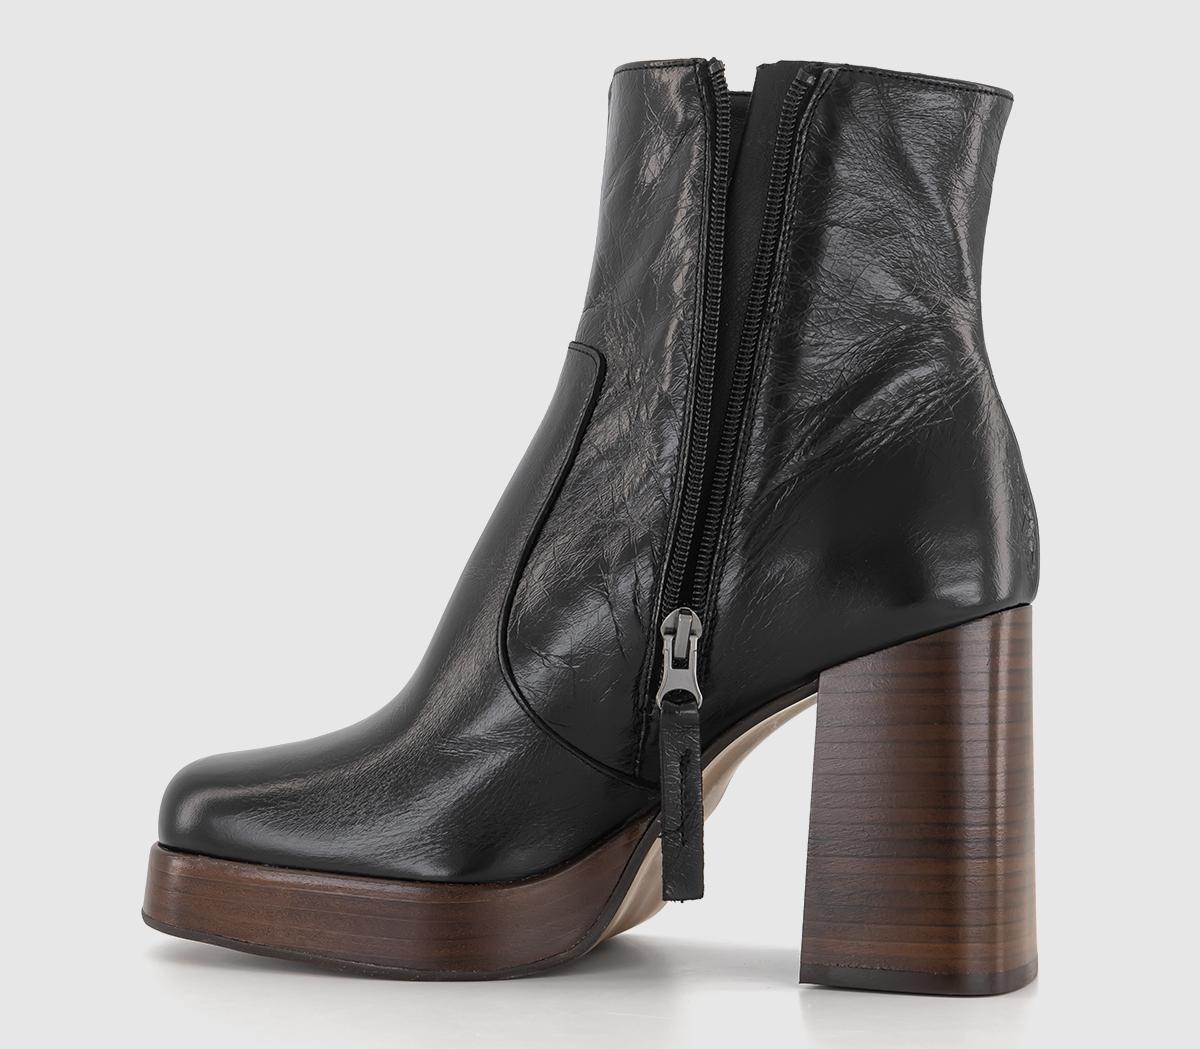 OFFICE Arlo Heeled Platform Boots Black Leather - Women's Ankle Boots